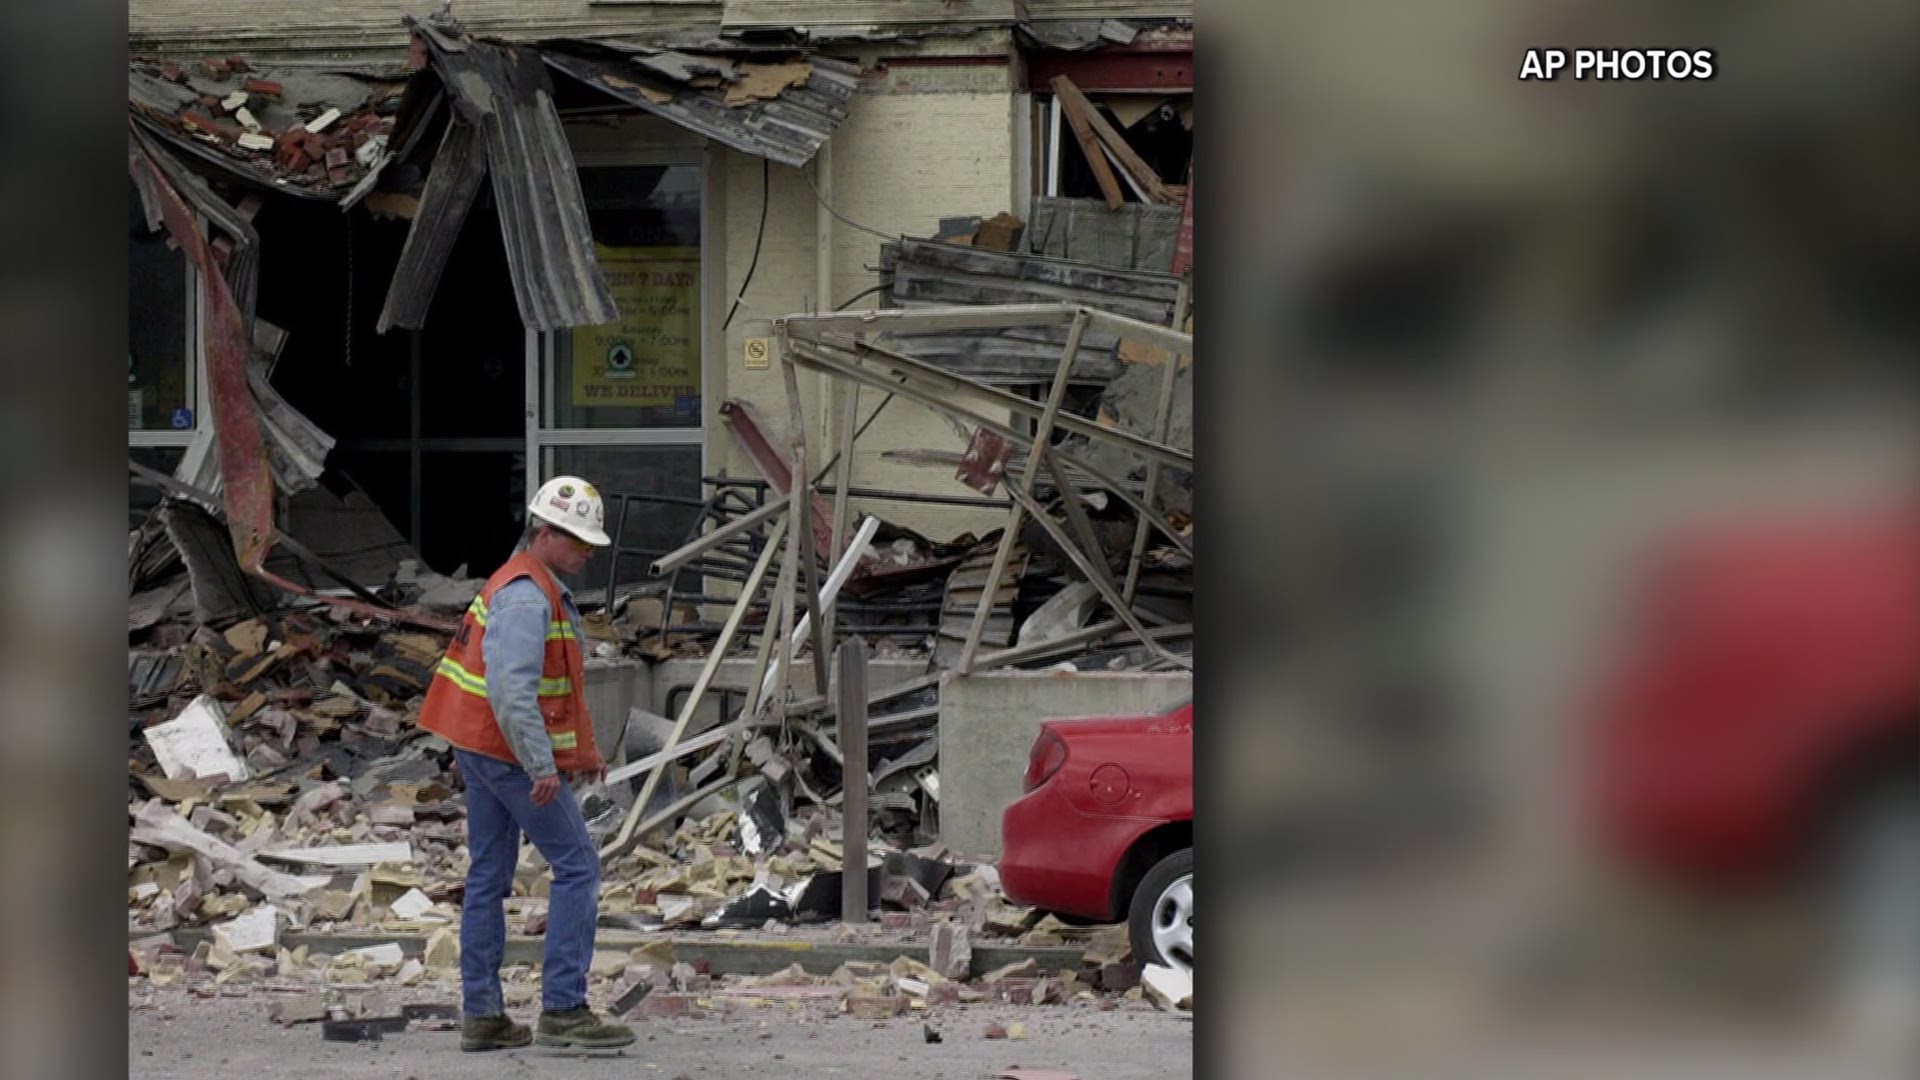 Photos show damage from the 2001 Nisqually earthquake.